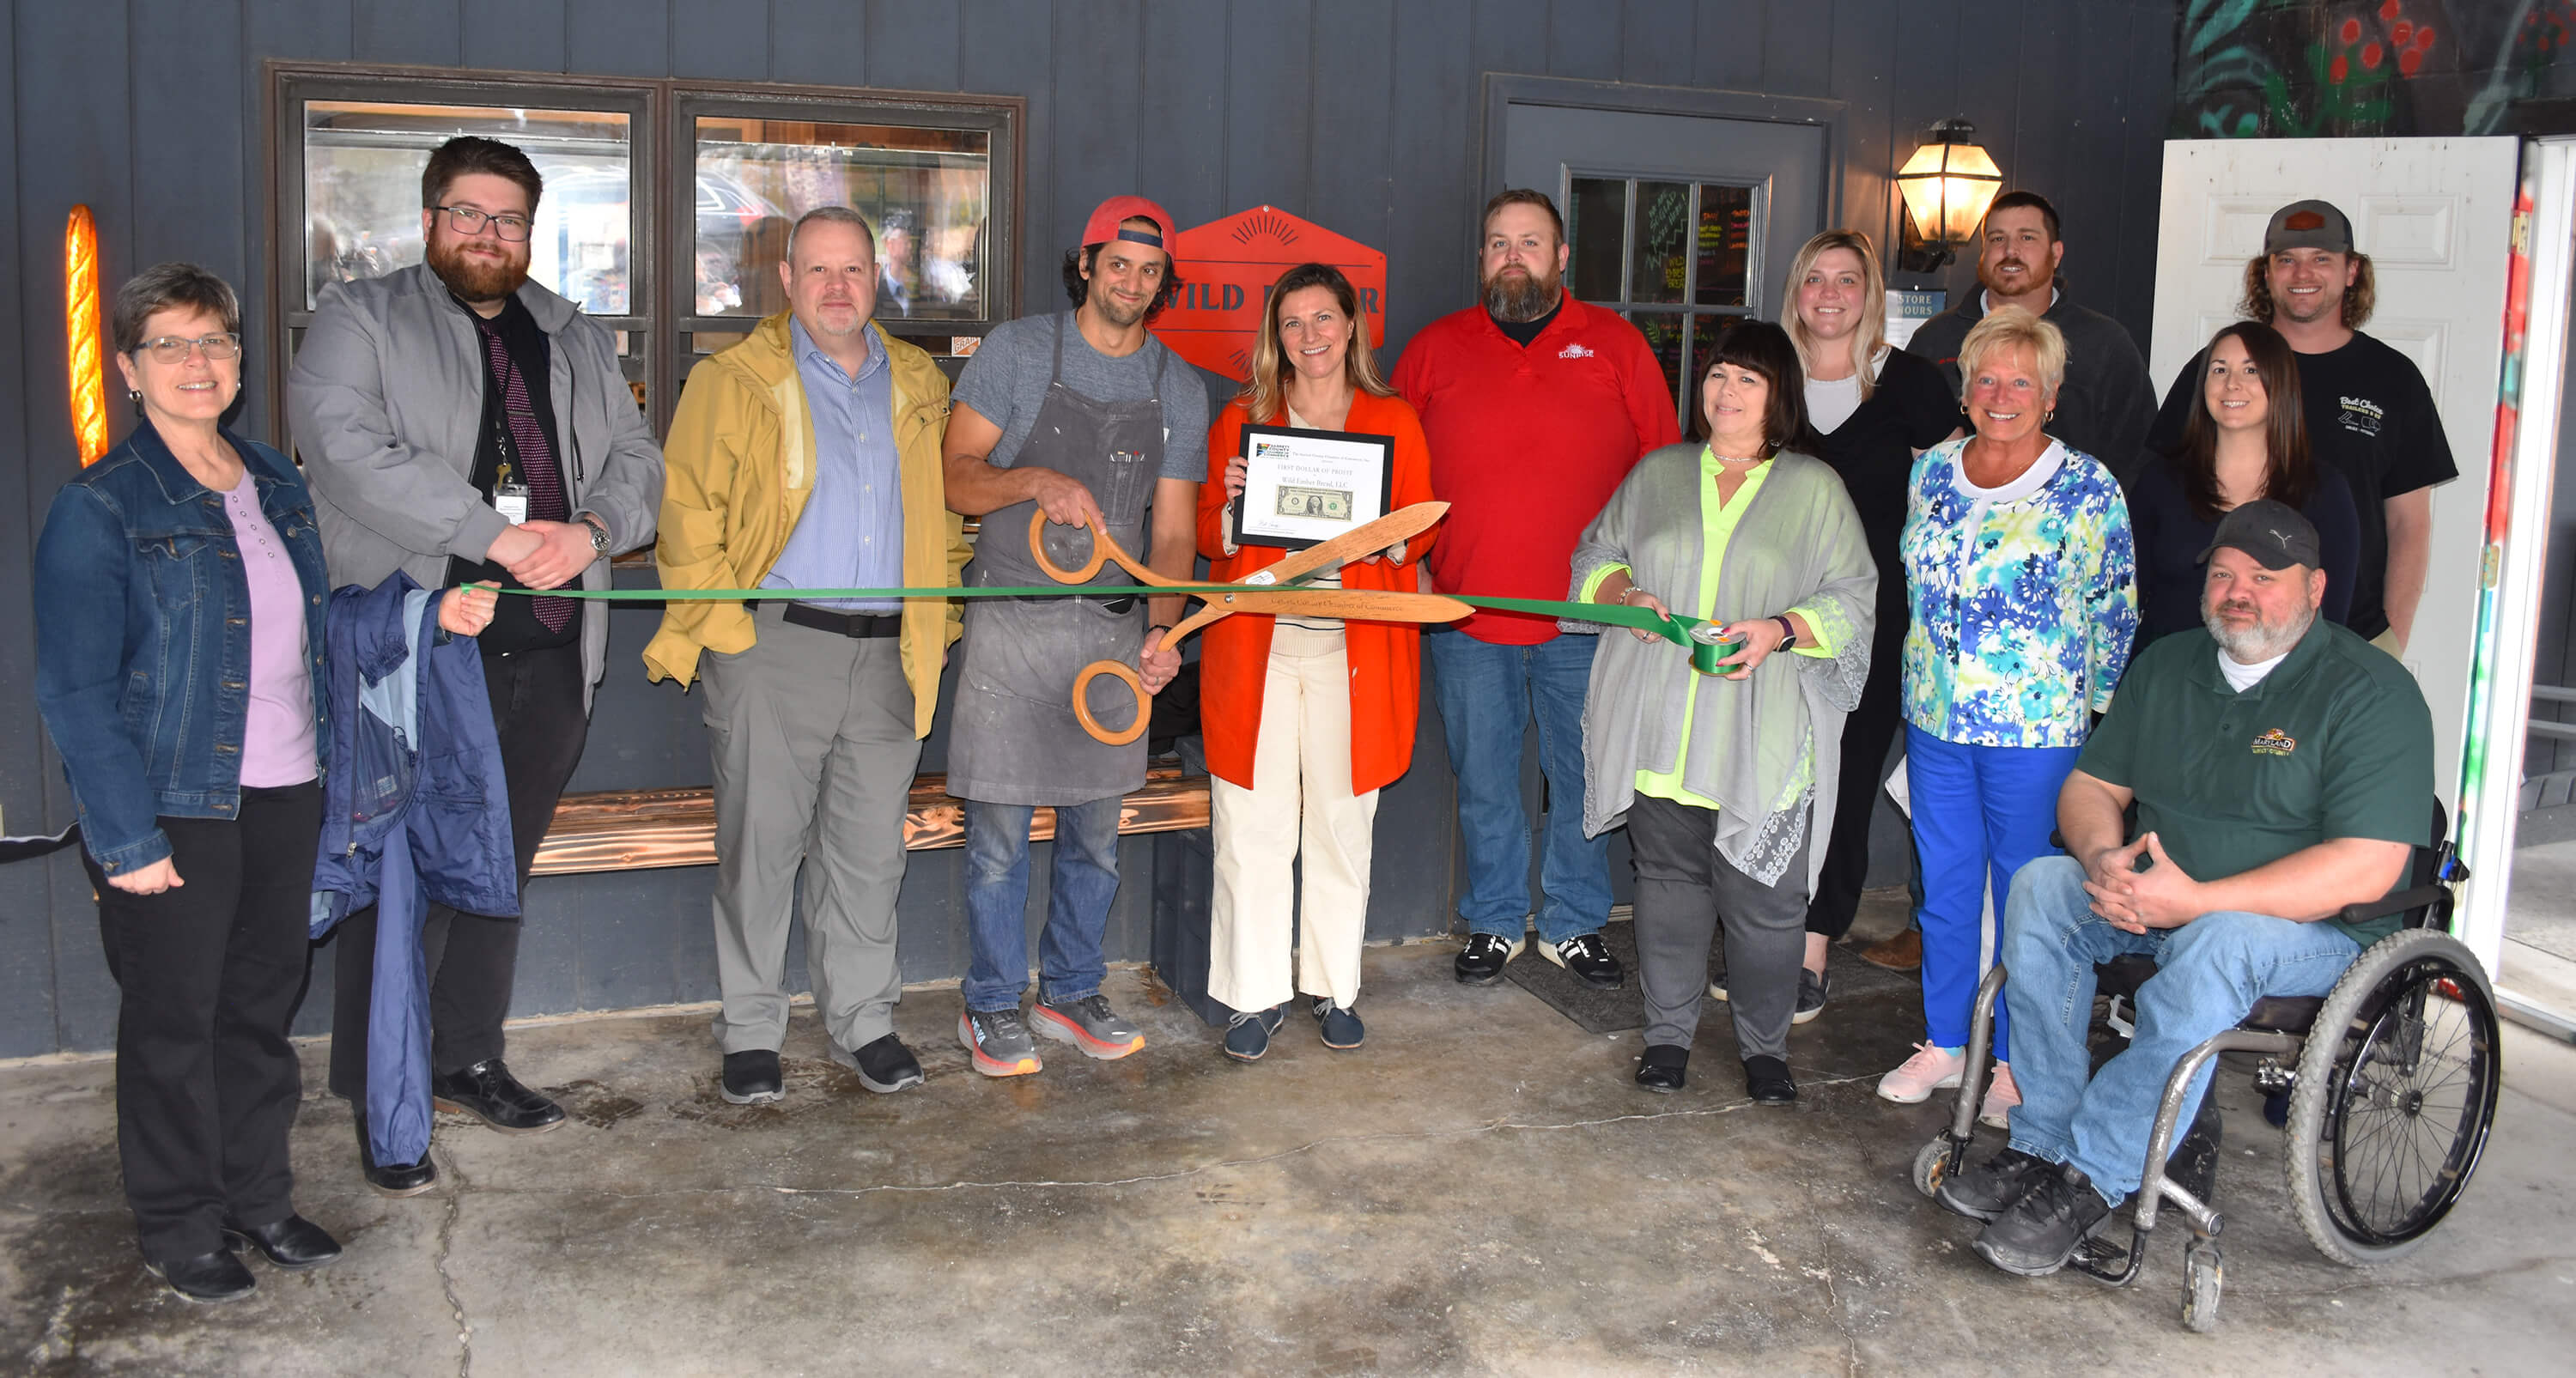 On Thursday, April 11, the Garrett County Chamber of Commerce partnered with the Garrett County Department of Business Development to hold a ribbon cutting ceremony for the grand opening of Wild Ember Bread.